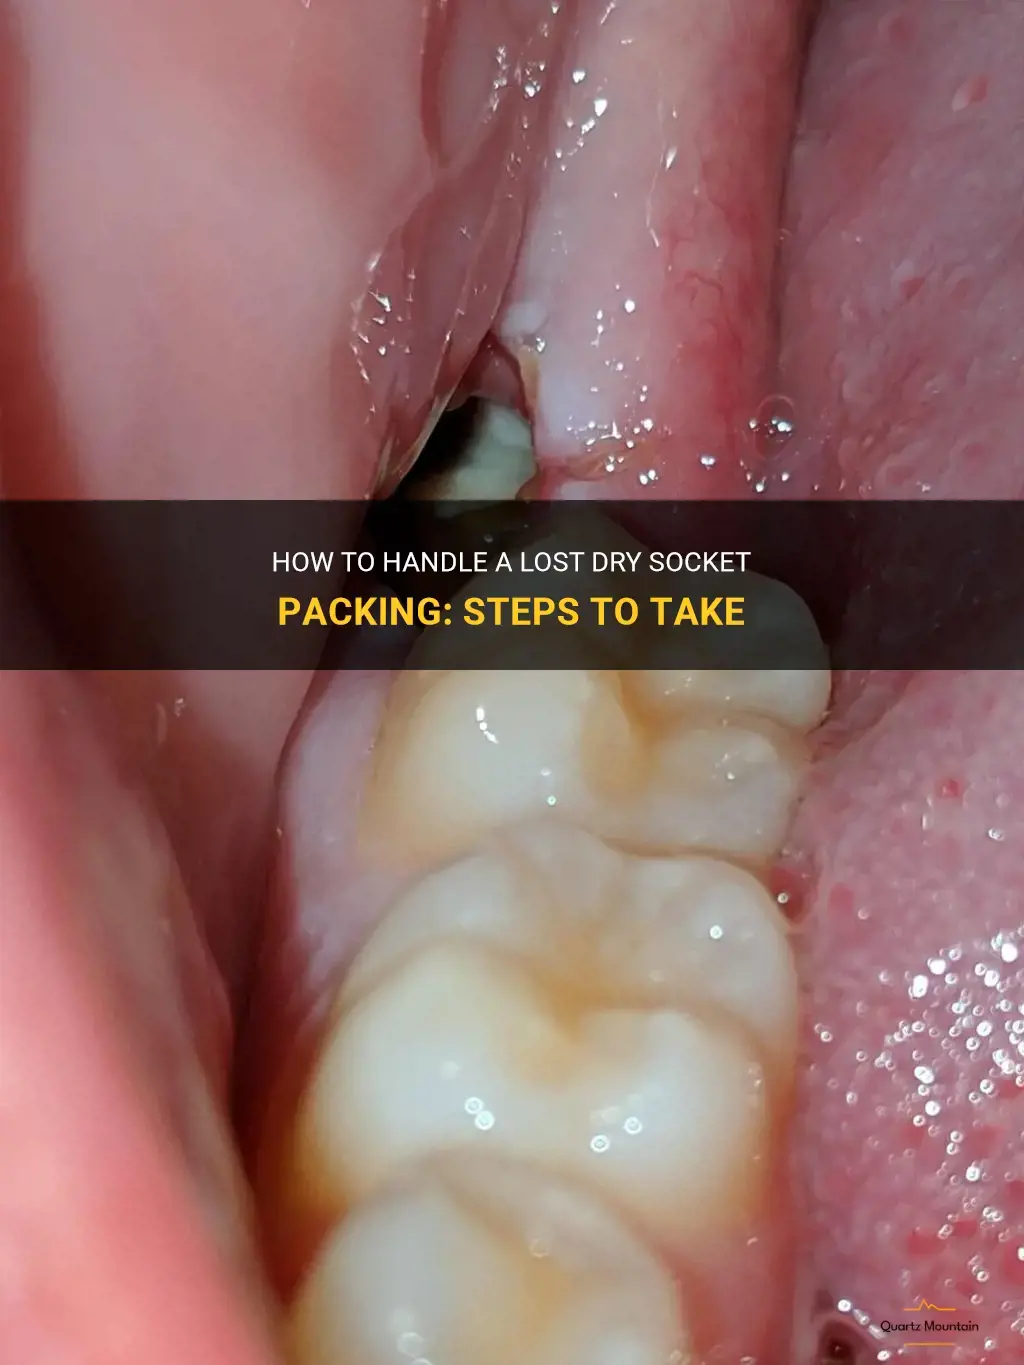 what to do if dry socket packing comes out